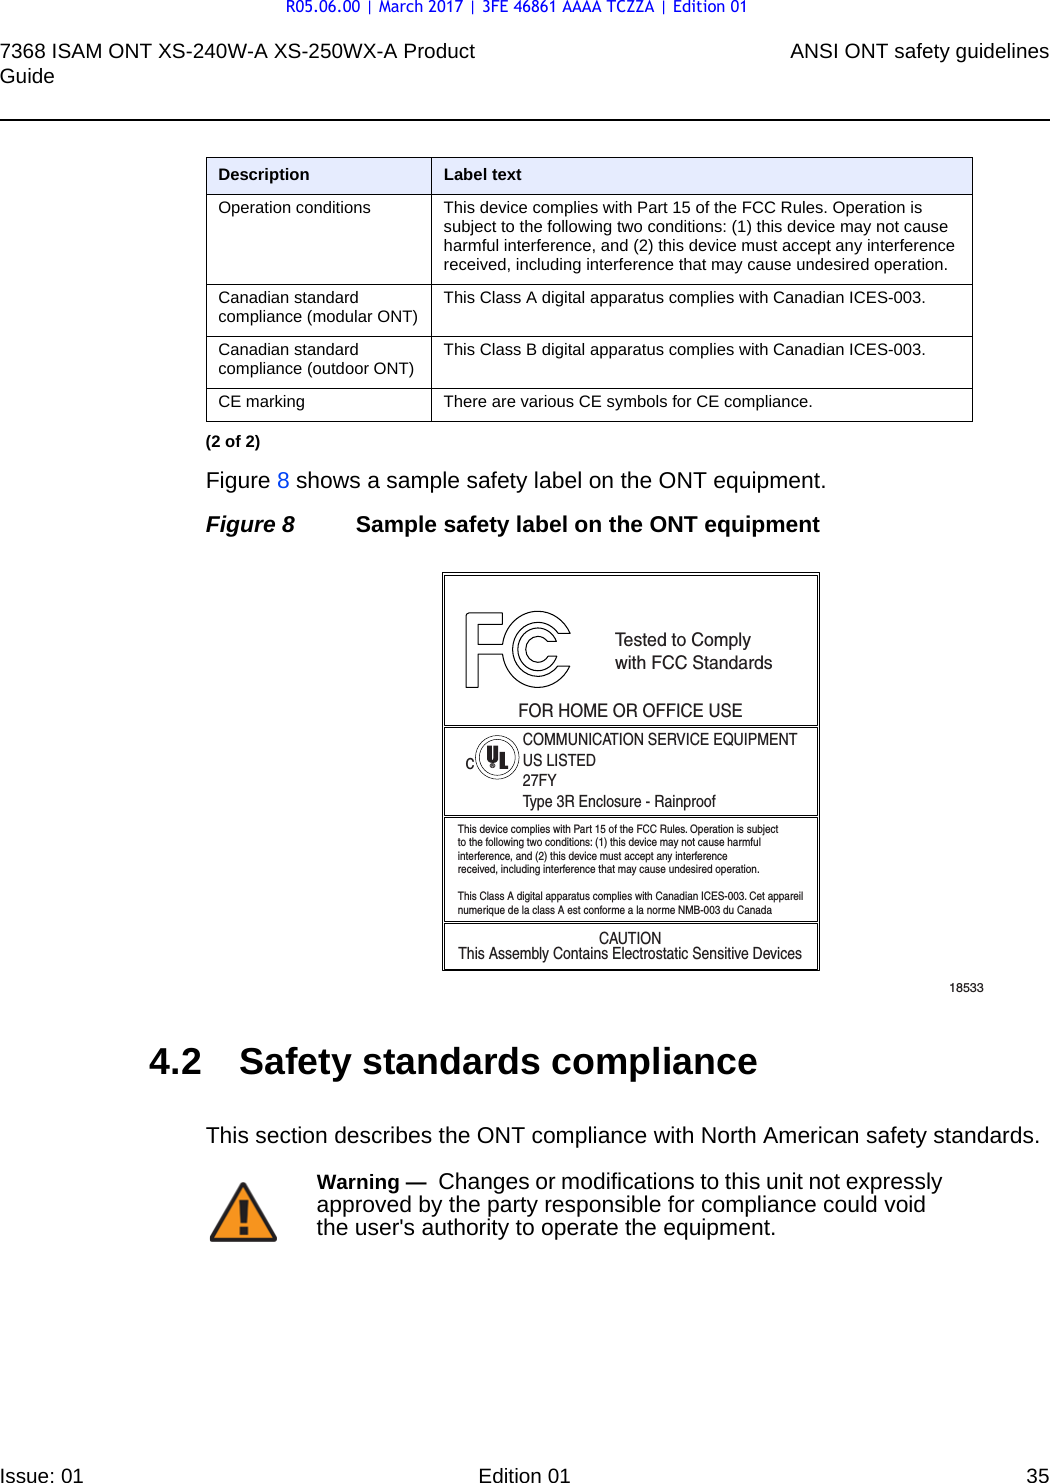 7368 ISAM ONT XS-240W-A XS-250WX-A Product Guide ANSI ONT safety guidelinesIssue: 01 Edition 01 35 Figure 8 shows a sample safety label on the ONT equipment.Figure 8 Sample safety label on the ONT equipment4.2 Safety standards complianceThis section describes the ONT compliance with North American safety standards.Operation conditions This device complies with Part 15 of the FCC Rules. Operation is subject to the following two conditions: (1) this device may not cause harmful interference, and (2) this device must accept any interference received, including interference that may cause undesired operation.Canadian standard compliance (modular ONT) This Class A digital apparatus complies with Canadian ICES-003. Canadian standard compliance (outdoor ONT) This Class B digital apparatus complies with Canadian ICES-003. CE marking There are various CE symbols for CE compliance.Description Label text(2 of 2)18533This device complies with Part 15 of the FCC Rules. Operation is subjectto the following two conditions: (1) this device may not cause harmfulinterference, and (2) this device must accept any interferencereceived, including interference that may cause undesired operation.This Class A digital apparatus complies with Canadian ICES-003. Cet appareilnumerique de la class A est conforme a la norme NMB-003 du CanadaTested to Complywith FCC StandardsFOR HOME OR OFFICE USECOMMUNICATION SERVICE EQUIPMENTUS LISTED27FYType 3R Enclosure - RainproofCAUTIONThis Assembly Contains Electrostatic Sensitive Devicesc®Warning —  Changes or modifications to this unit not expressly approved by the party responsible for compliance could void the user&apos;s authority to operate the equipment.R05.06.00 | March 2017 | 3FE 46861 AAAA TCZZA | Edition 01